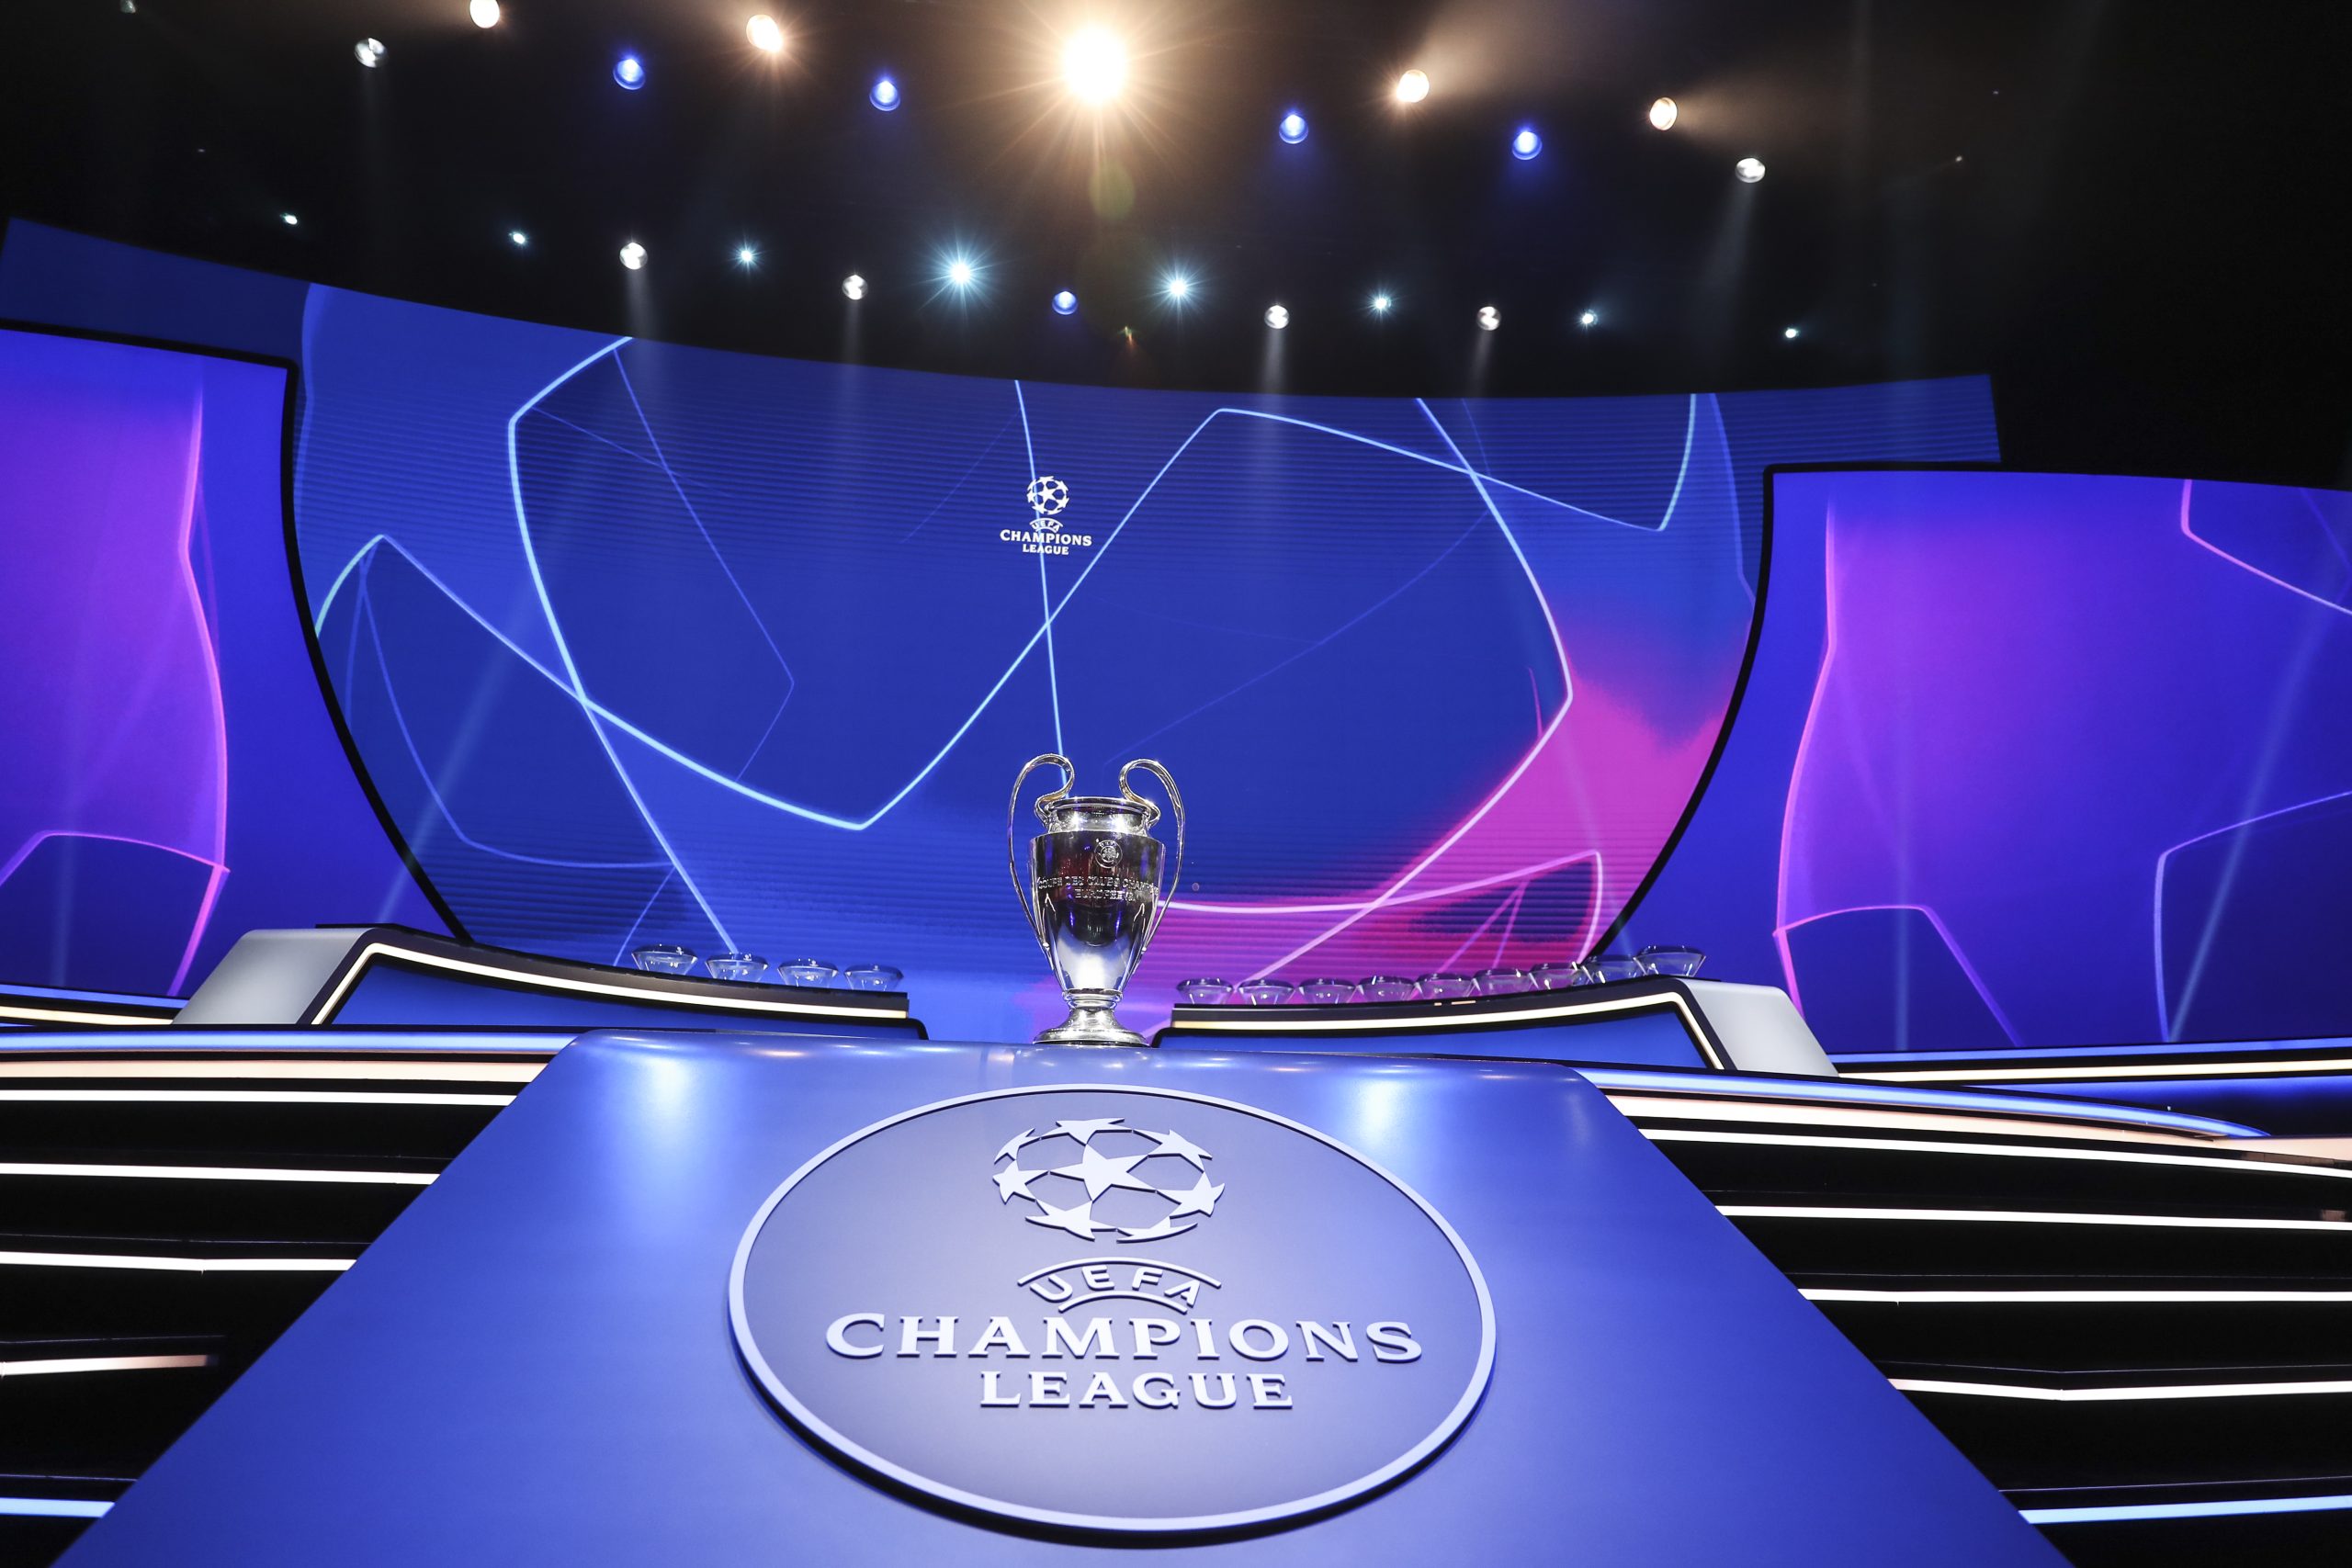 UEFA Champions League Round of 16 draw (LIVE UPDATES)